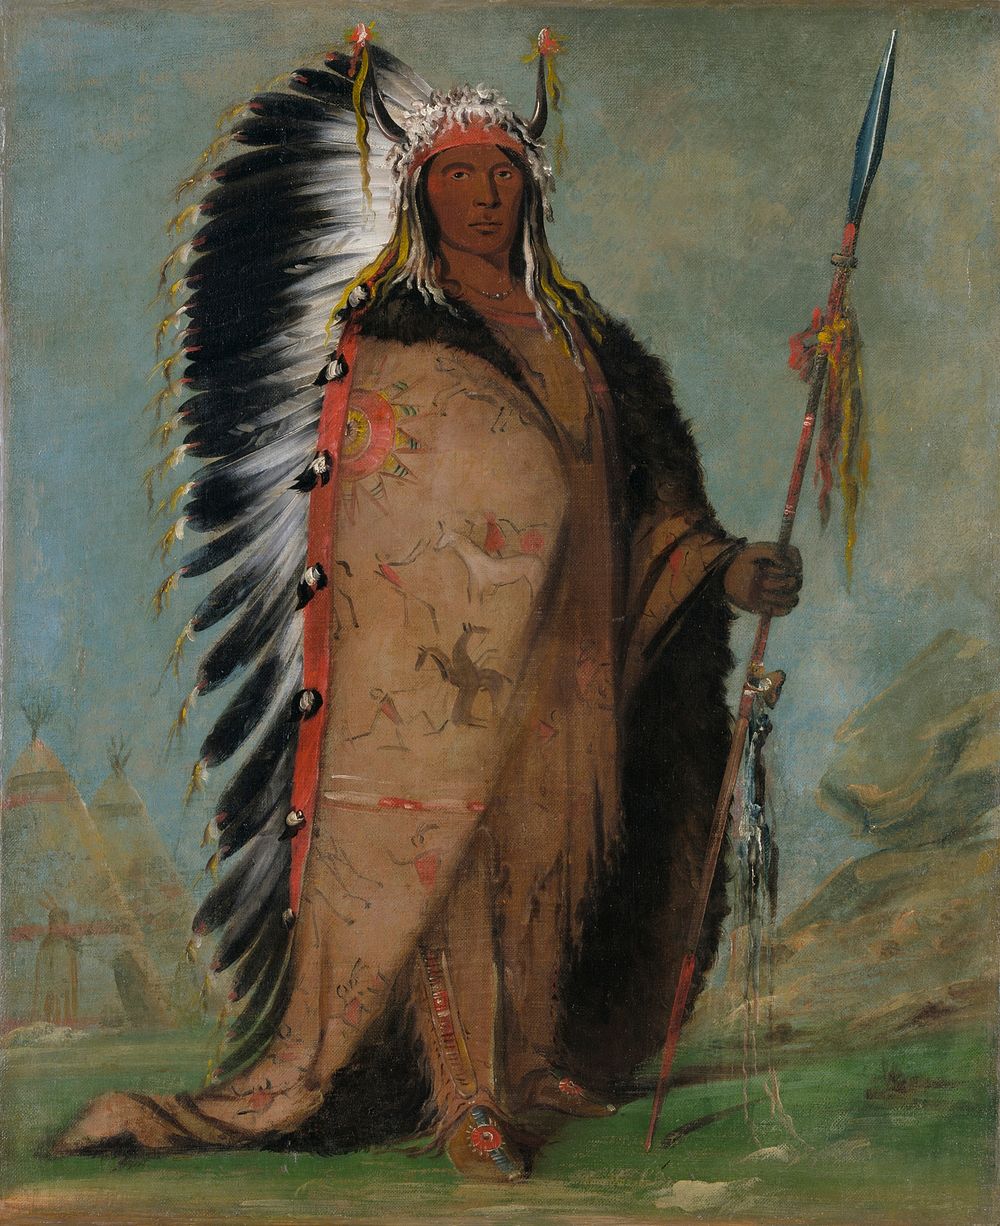 Ee-&aacute;h-s&aacute;-pa, Black Rock, a Two Kettle Chief (1832) painting in high resolution by George Catlin.  